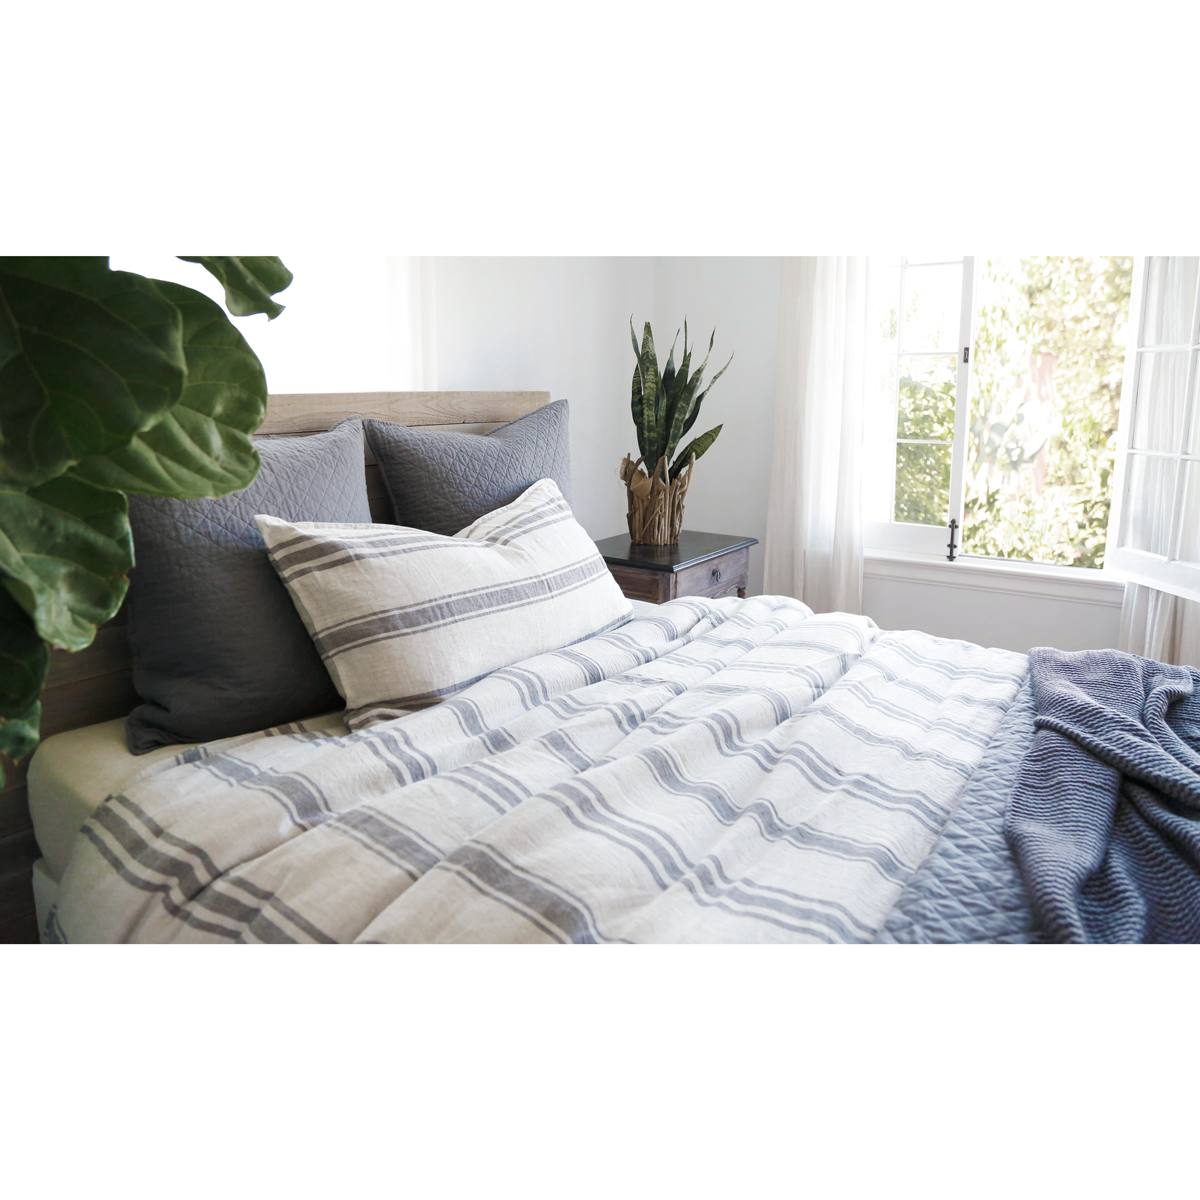 grey stripe linen duvet cover and shams on bed with dark grey Euro shams, throw and coverlet